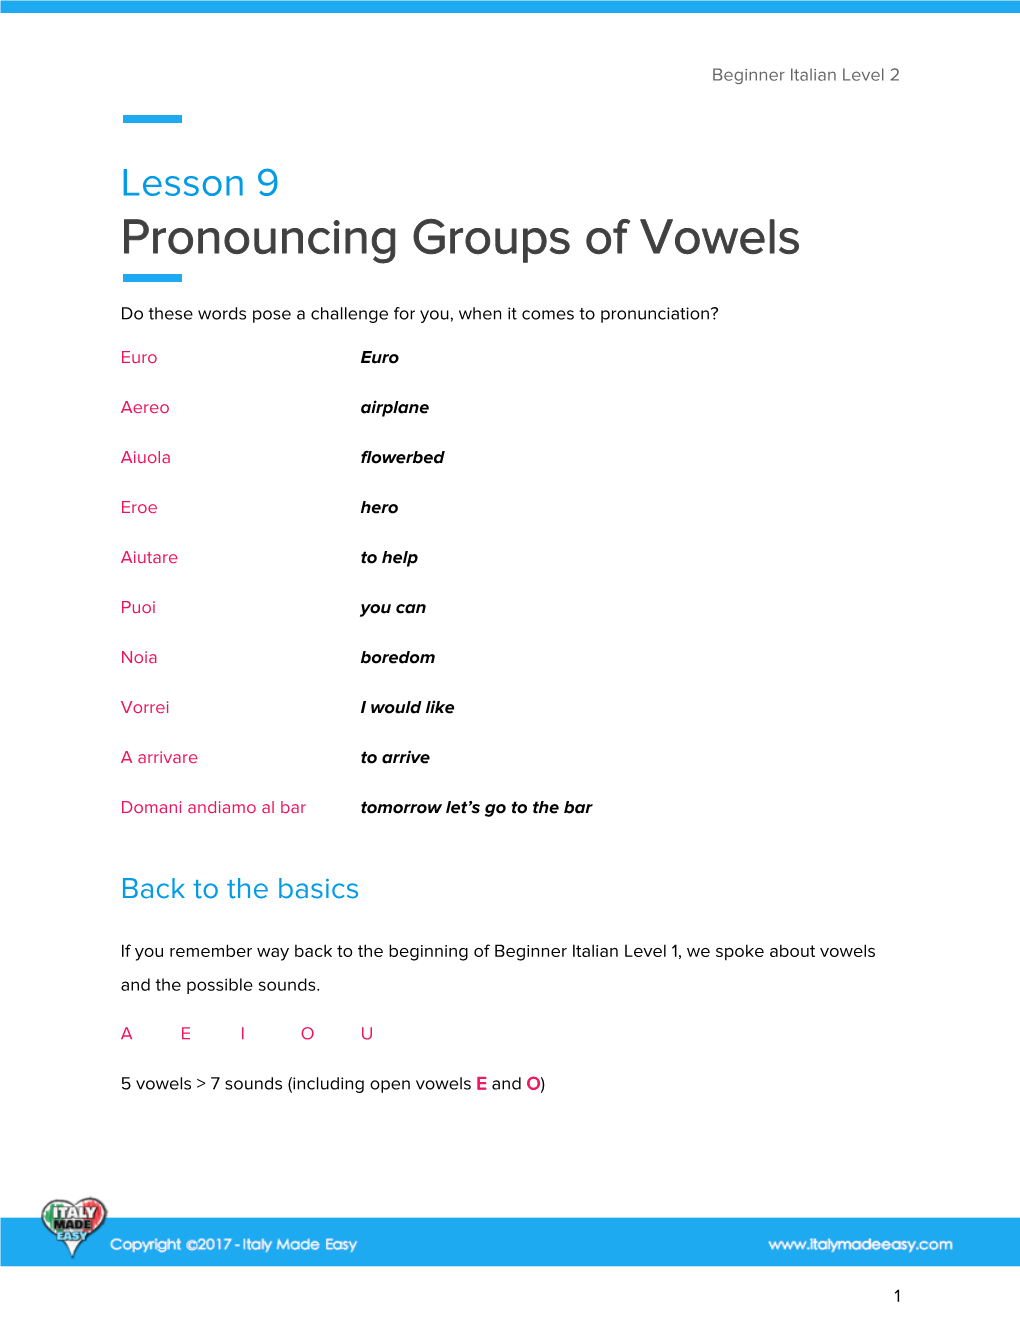 Pronouncing Groups of Vowels